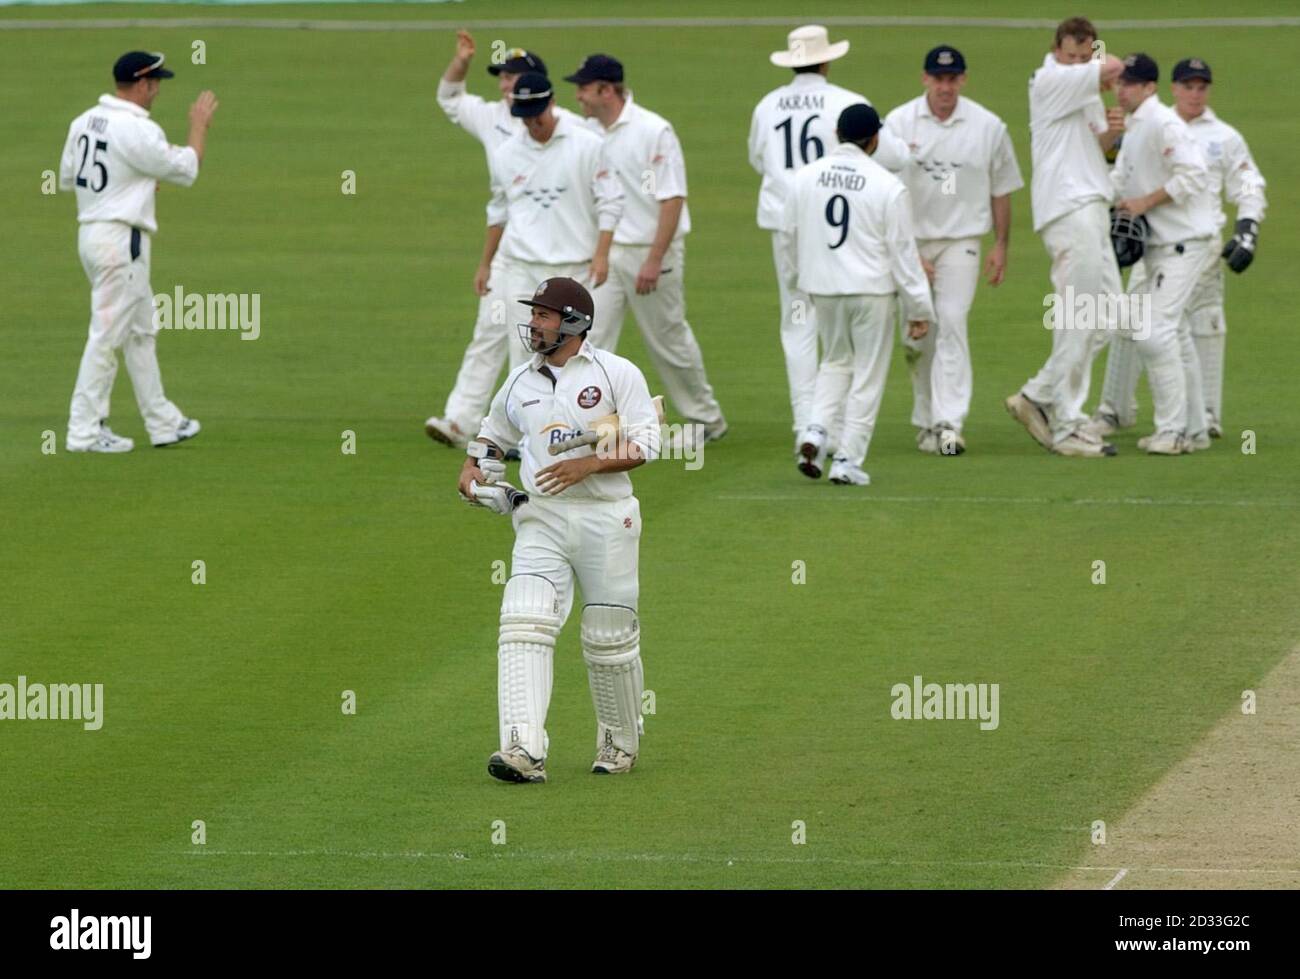 Surrey's Adam Hollioake (centre front) walks back to the pavilion after being caught by Sussex's Tim Ambrose for 4 runs off the bowling of Robin Martin-Jenkins during the first day of their County Championship match at The Oval, London.  Surrey were 84-5 at lunch. Stock Photo